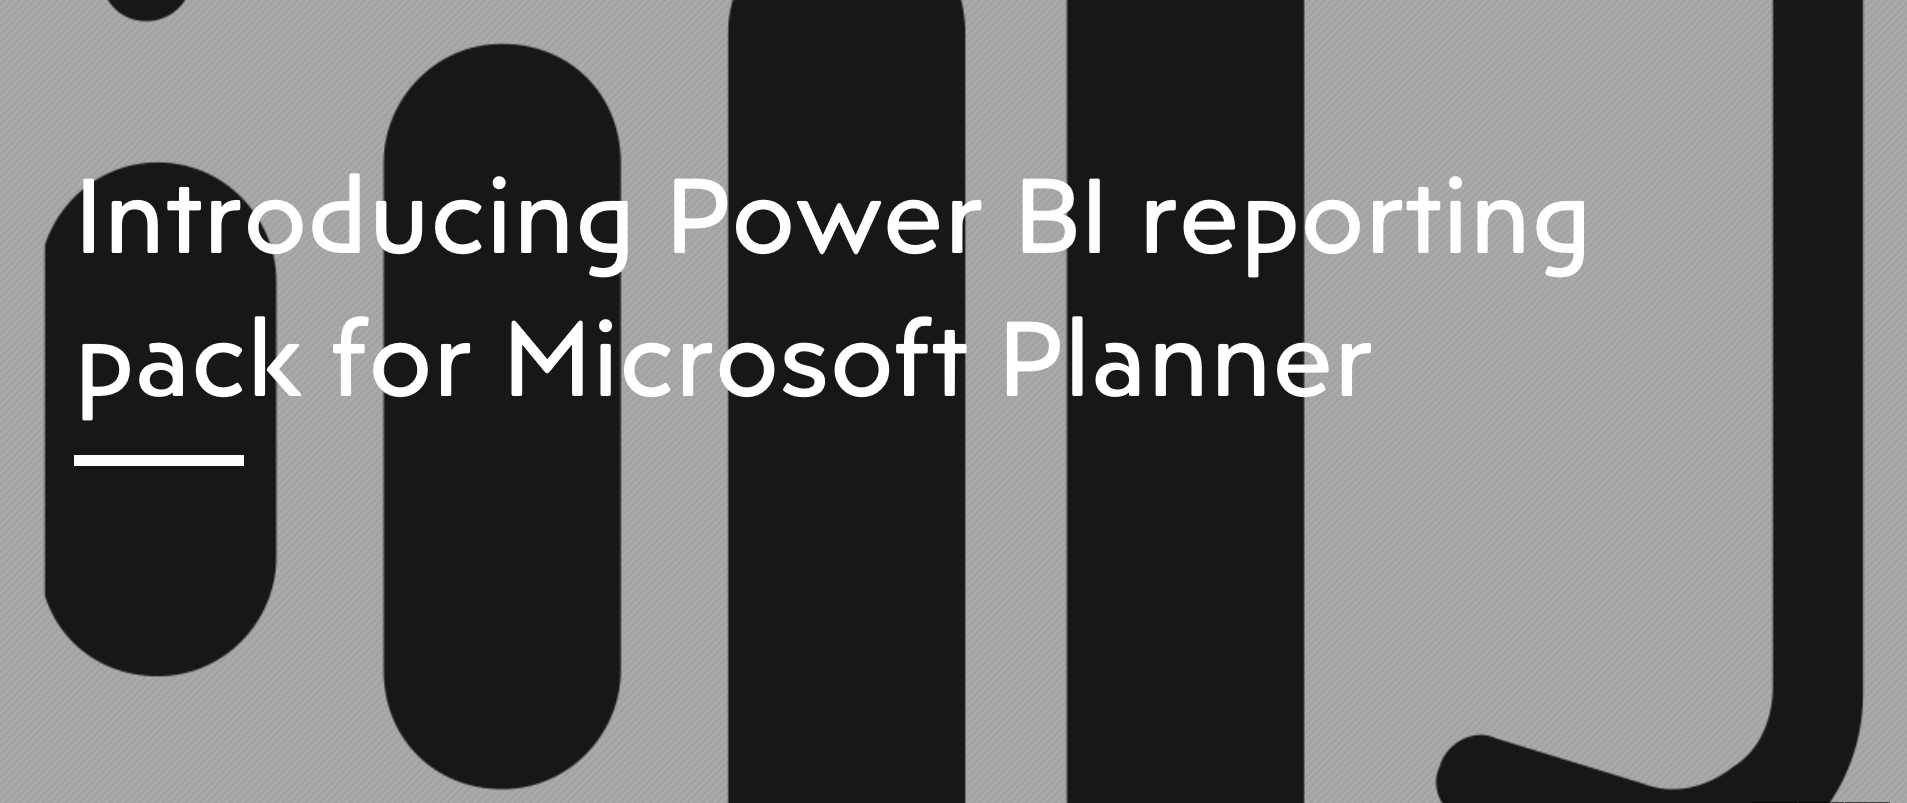 Introducing Power Bi Reporting For Microsoft Office 365 Planner